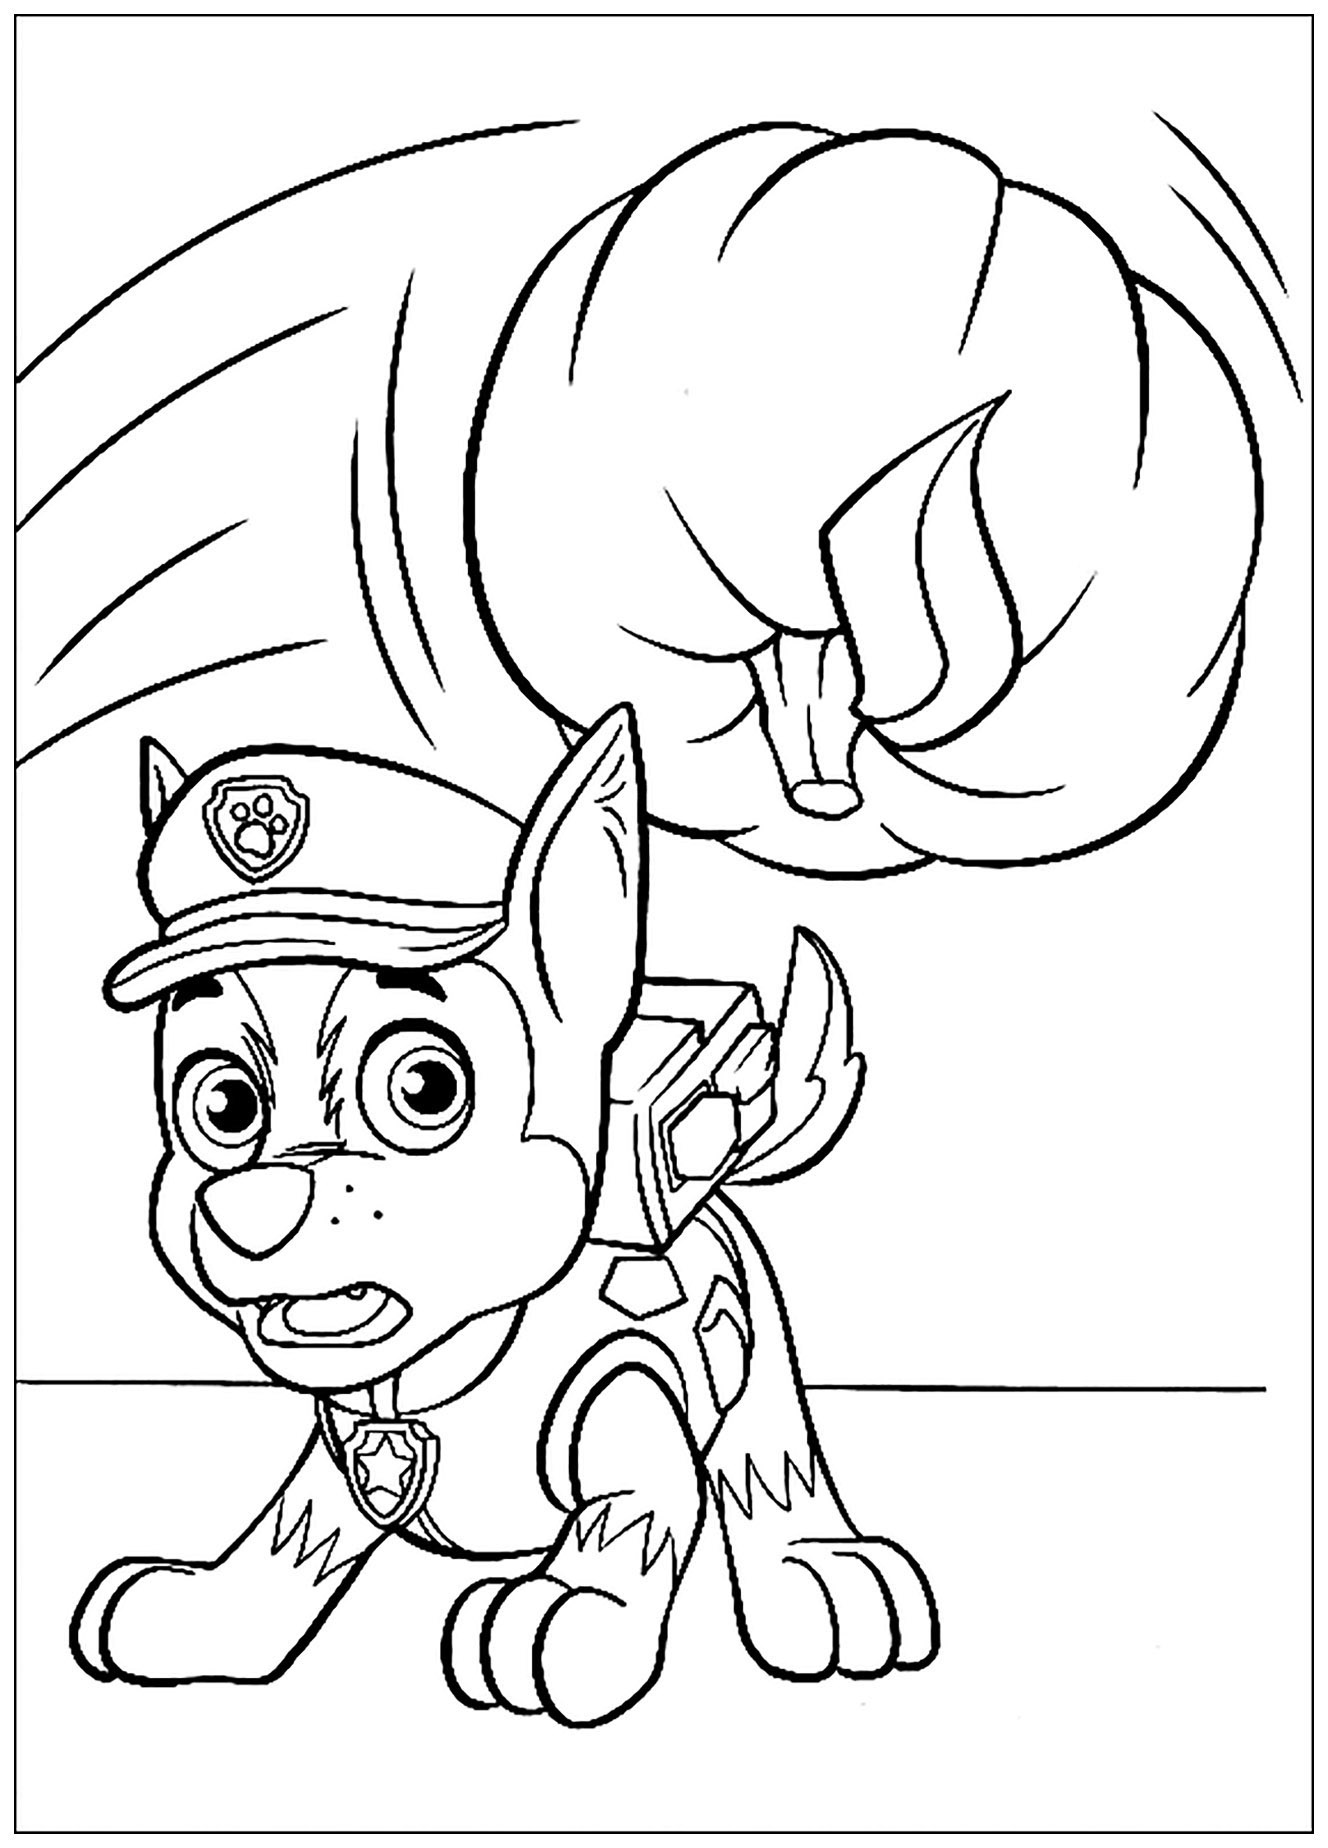 Super simple Patrouille coloring page: Chase and a pumpkin